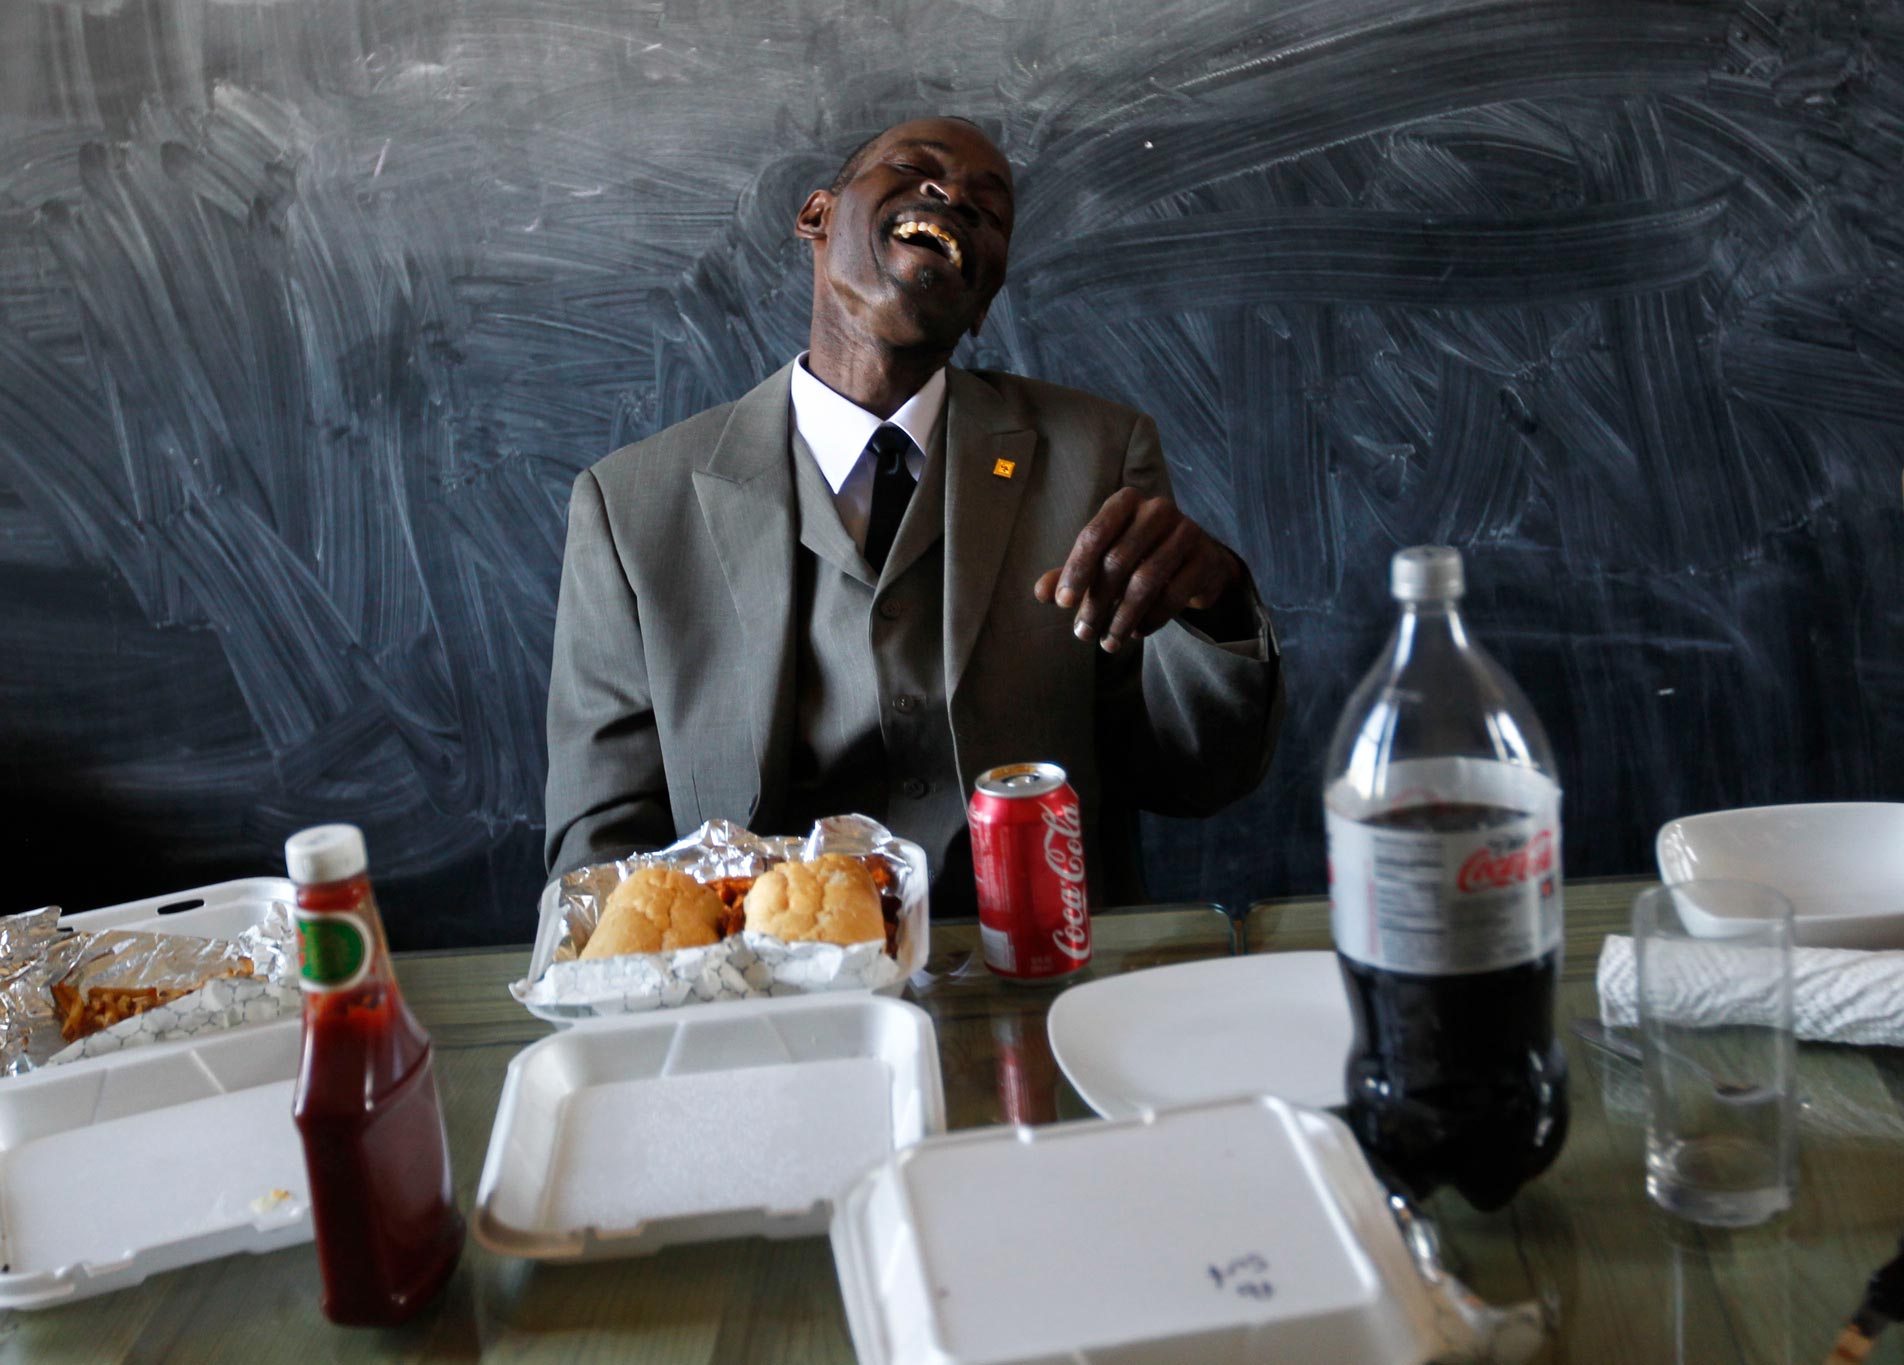 Henry James, who was exonerated from a rape conviction for which he served 30 years in prison, laughs as he eats his first meal, a shrimp po-boy and sweet potato fries, after being released from the Louisiana State Penitentiary in Angola, inside the offices of the Innocence Project New Orleans on Oct. 21, 2011. (Image: AP Photo/Gerald Herbert)